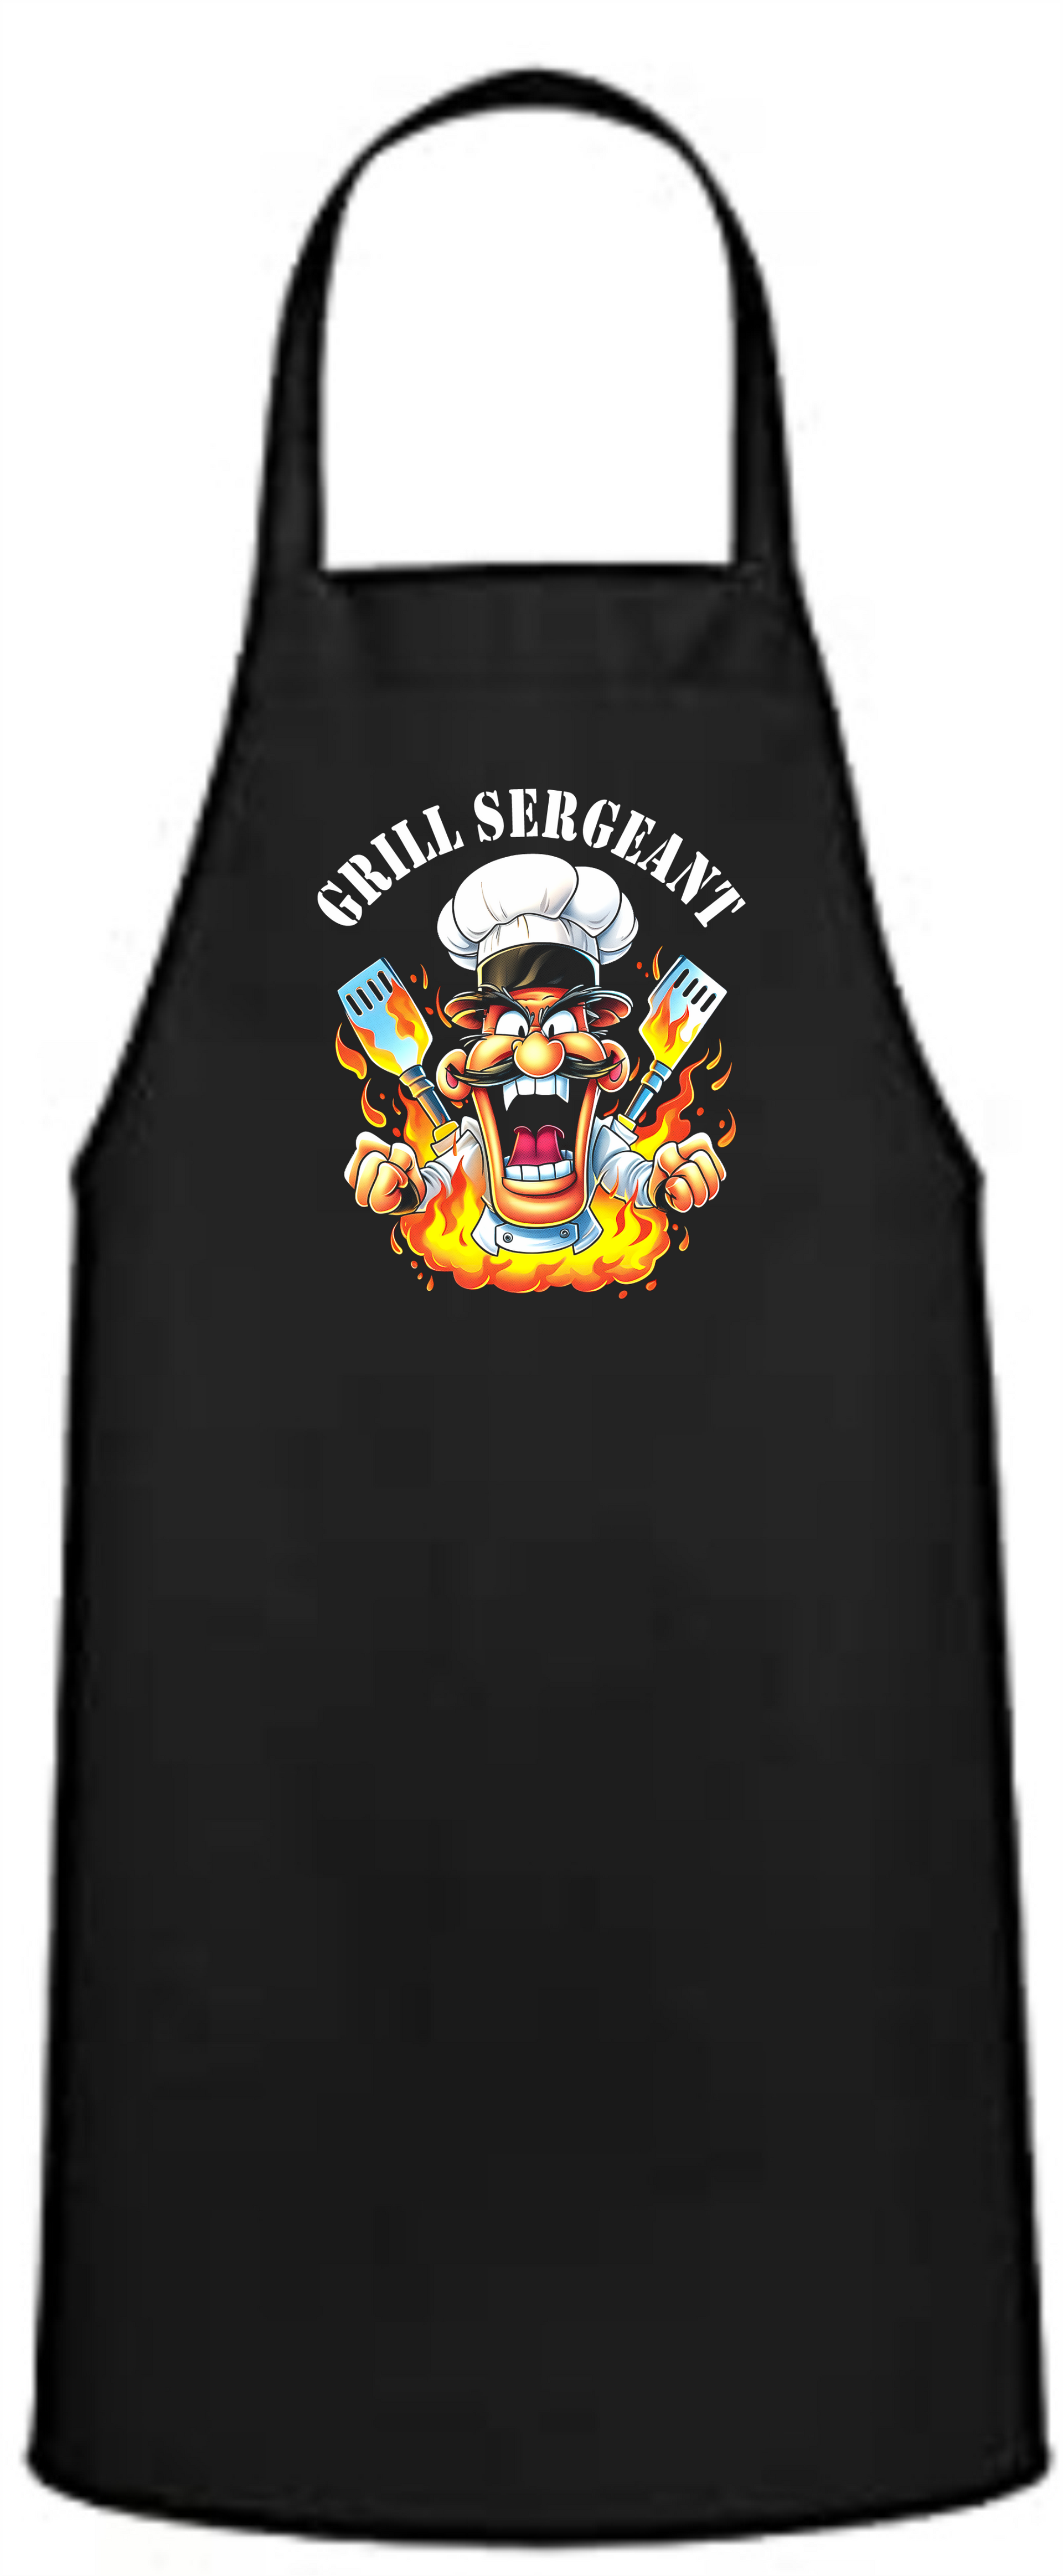 Grill Sergeant Apron Adult Shirt by Akron Pride Custom Tees | Akron Pride Custom Tees